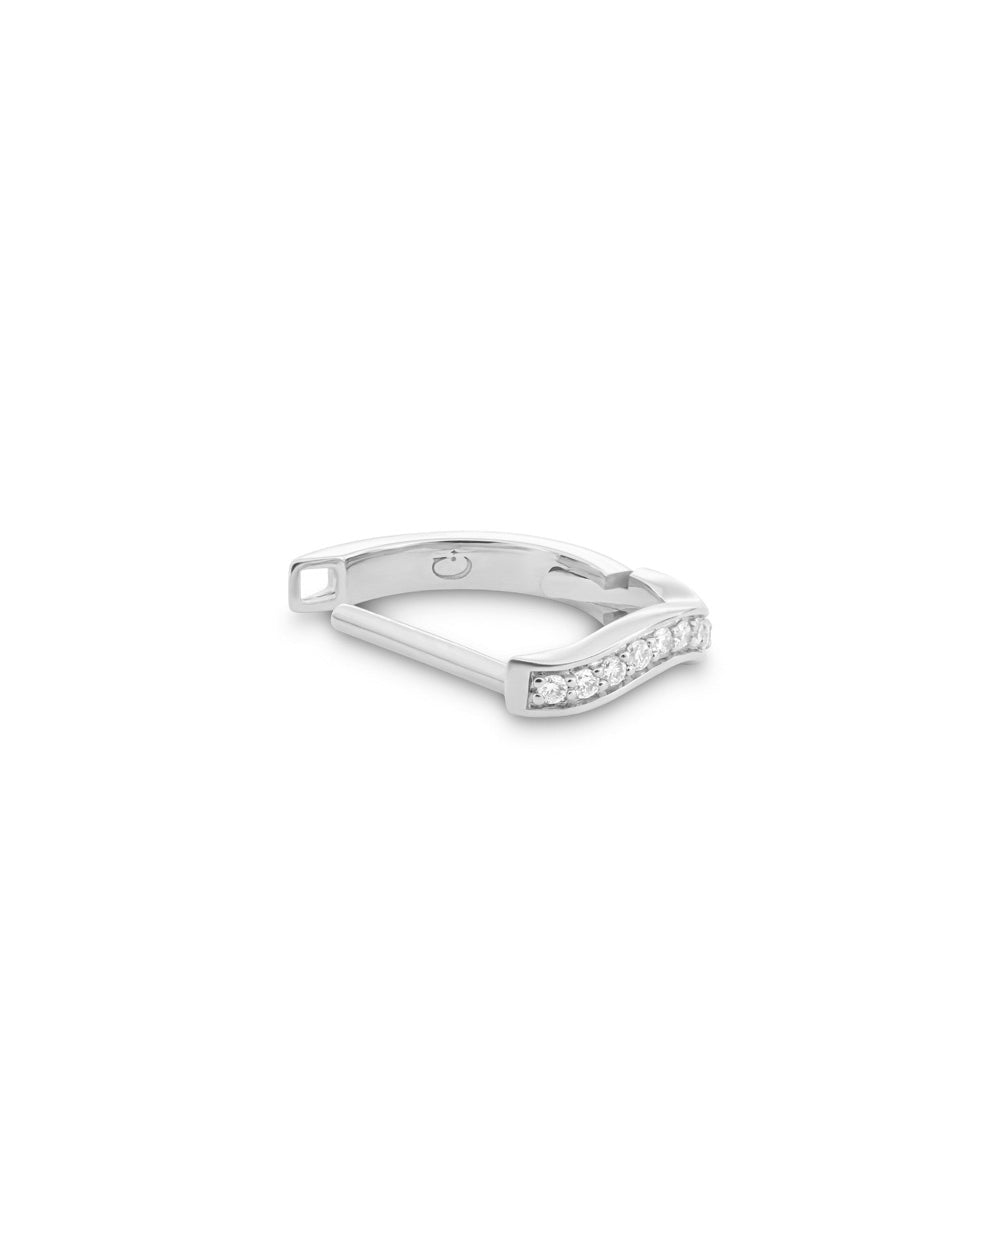 Covetear Wave Dimond Piercing Hoop#material_14k_White_Gold